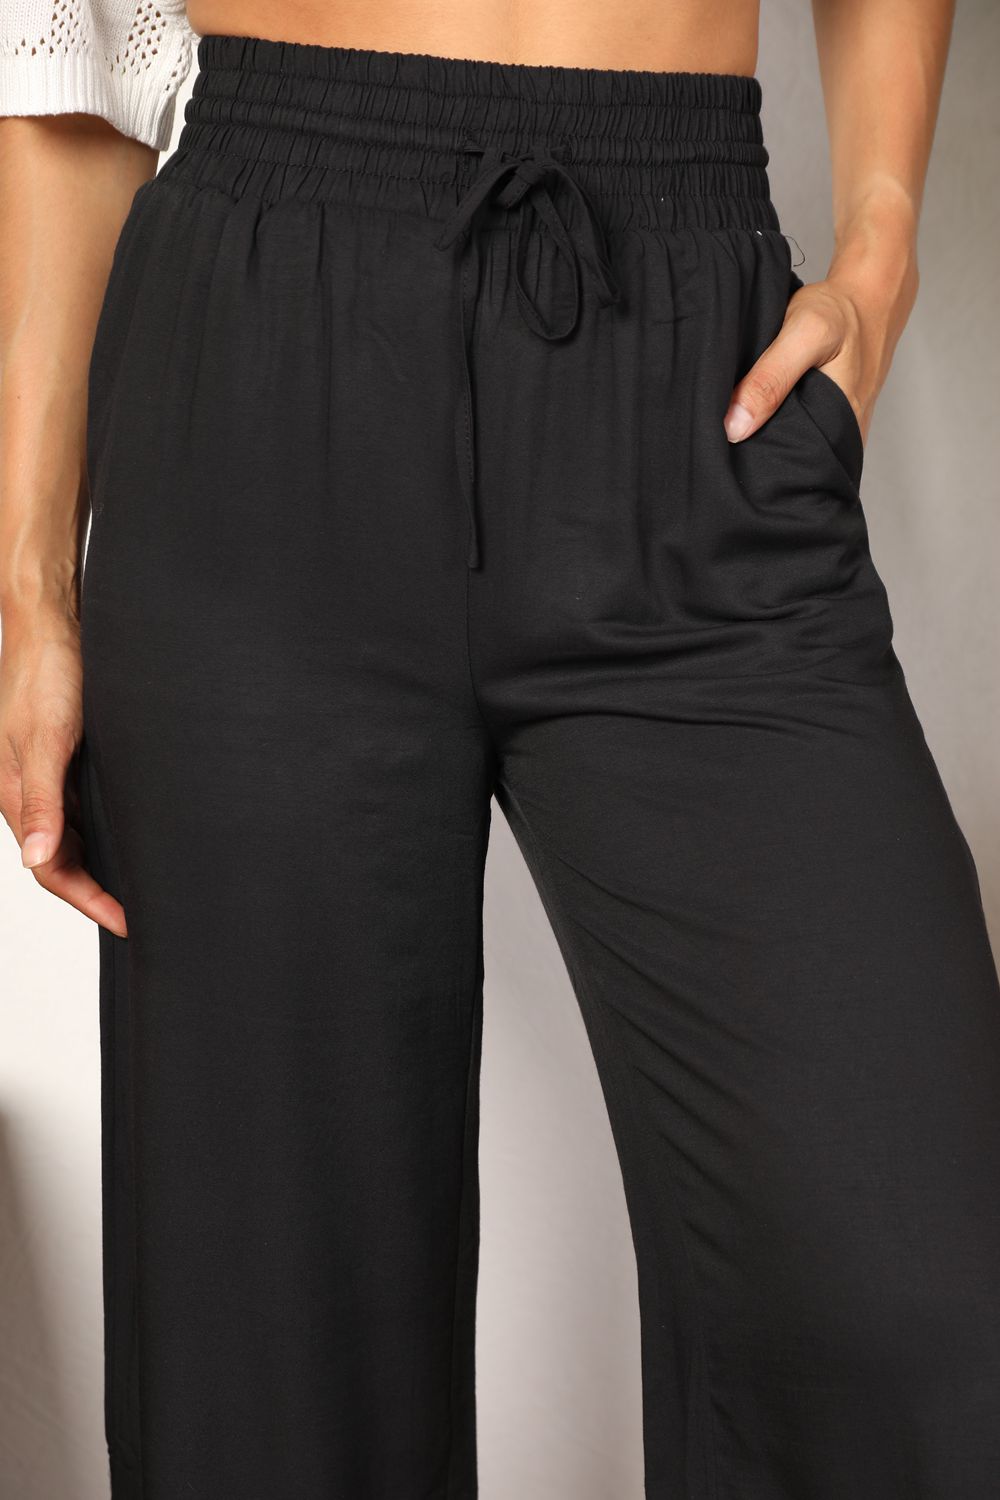 Double Take Drawstring Smocked Waist Wide Leg Pants - 2 Colors Available!